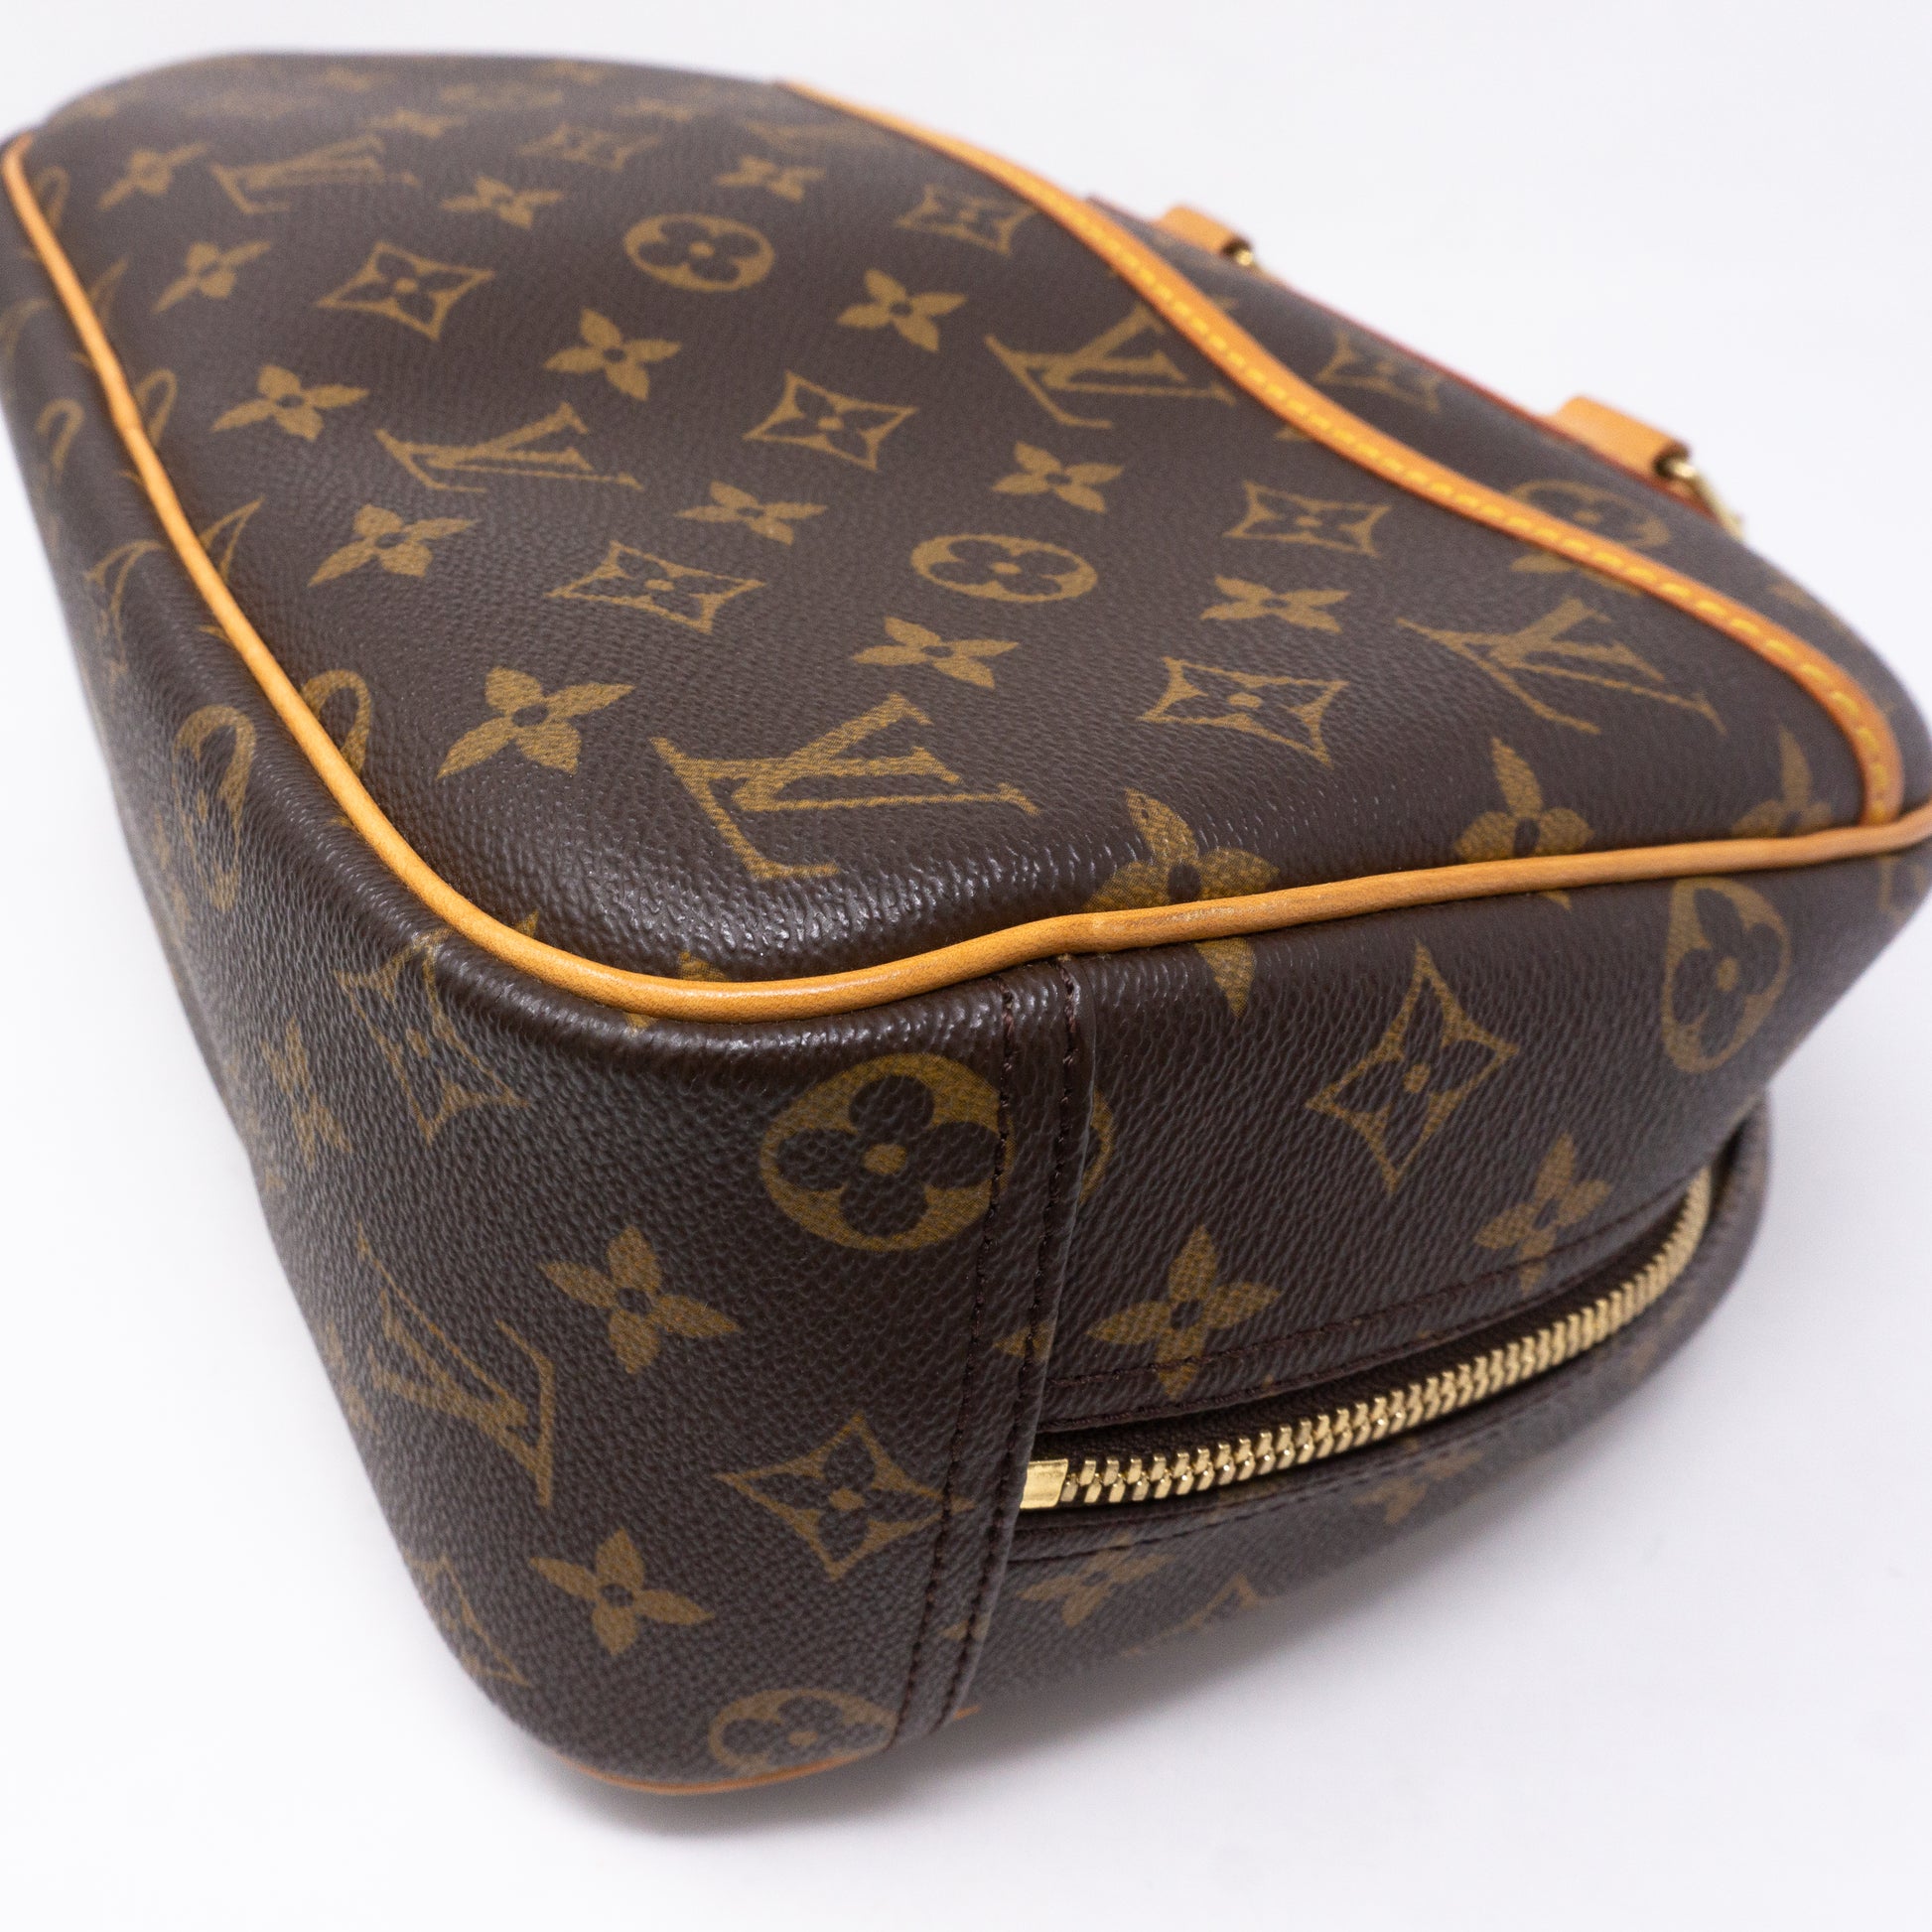 Louis Vuitton Trouville PM in monogram - Bags of CharmBags of Charm